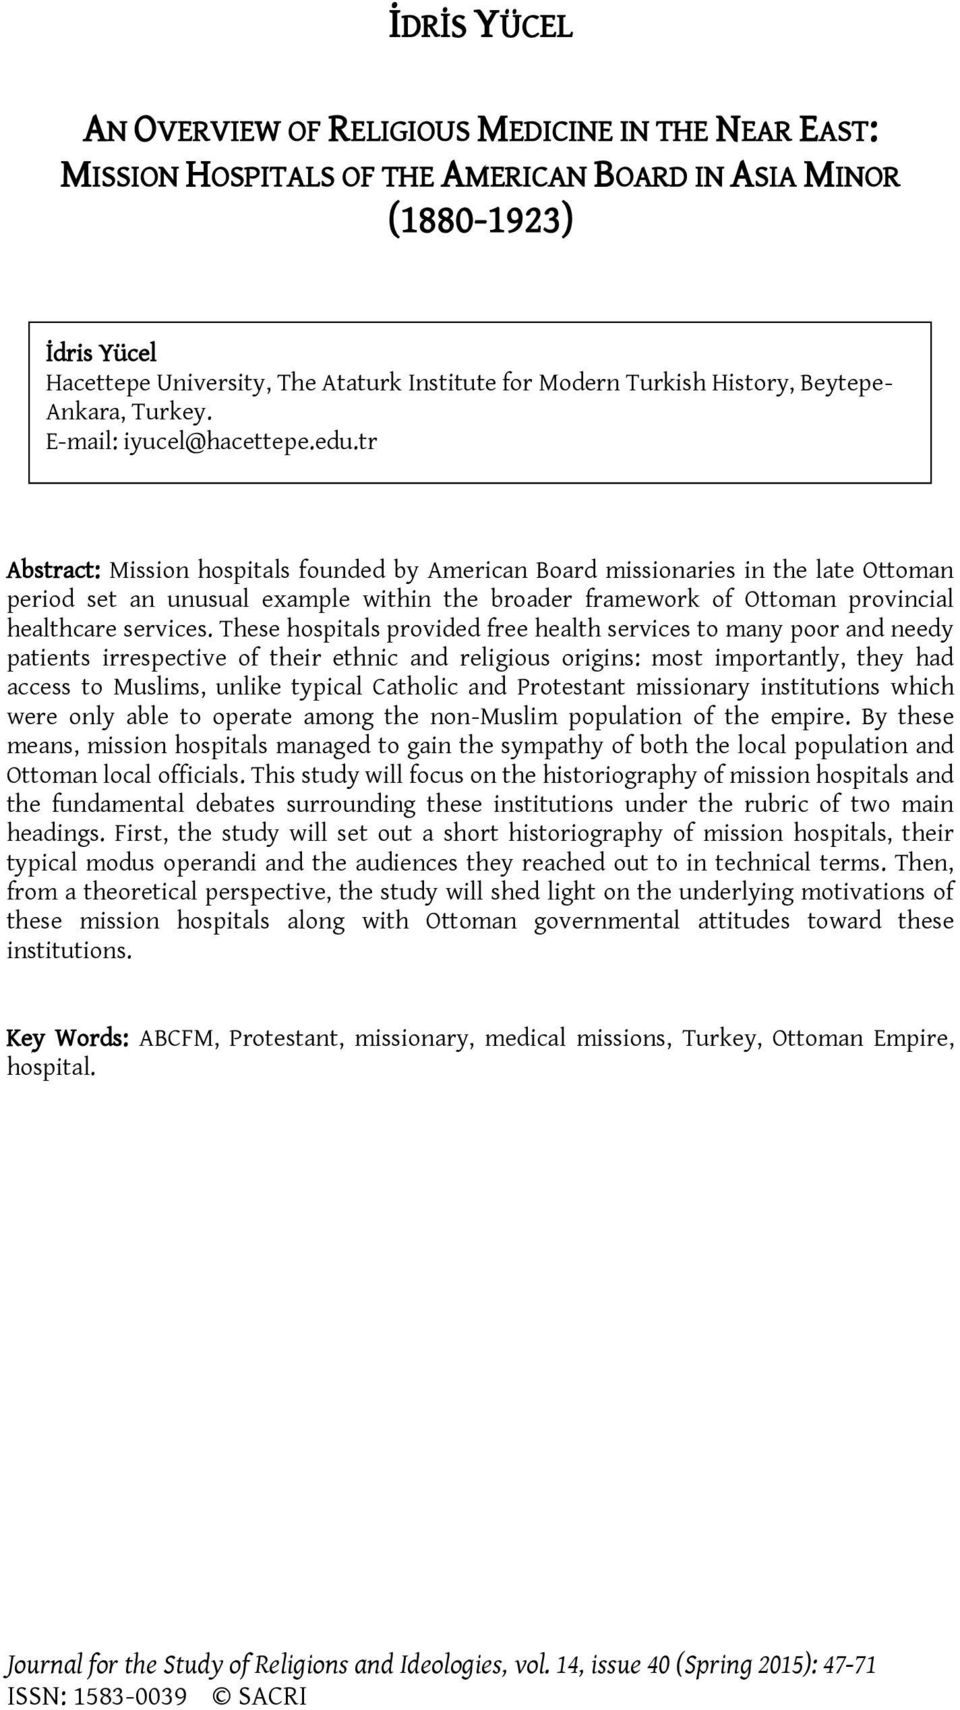 tr Abstract: Mission hospitals founded by American Board missionaries in the late Ottoman period set an unusual example within the broader framework of Ottoman provincial healthcare services.